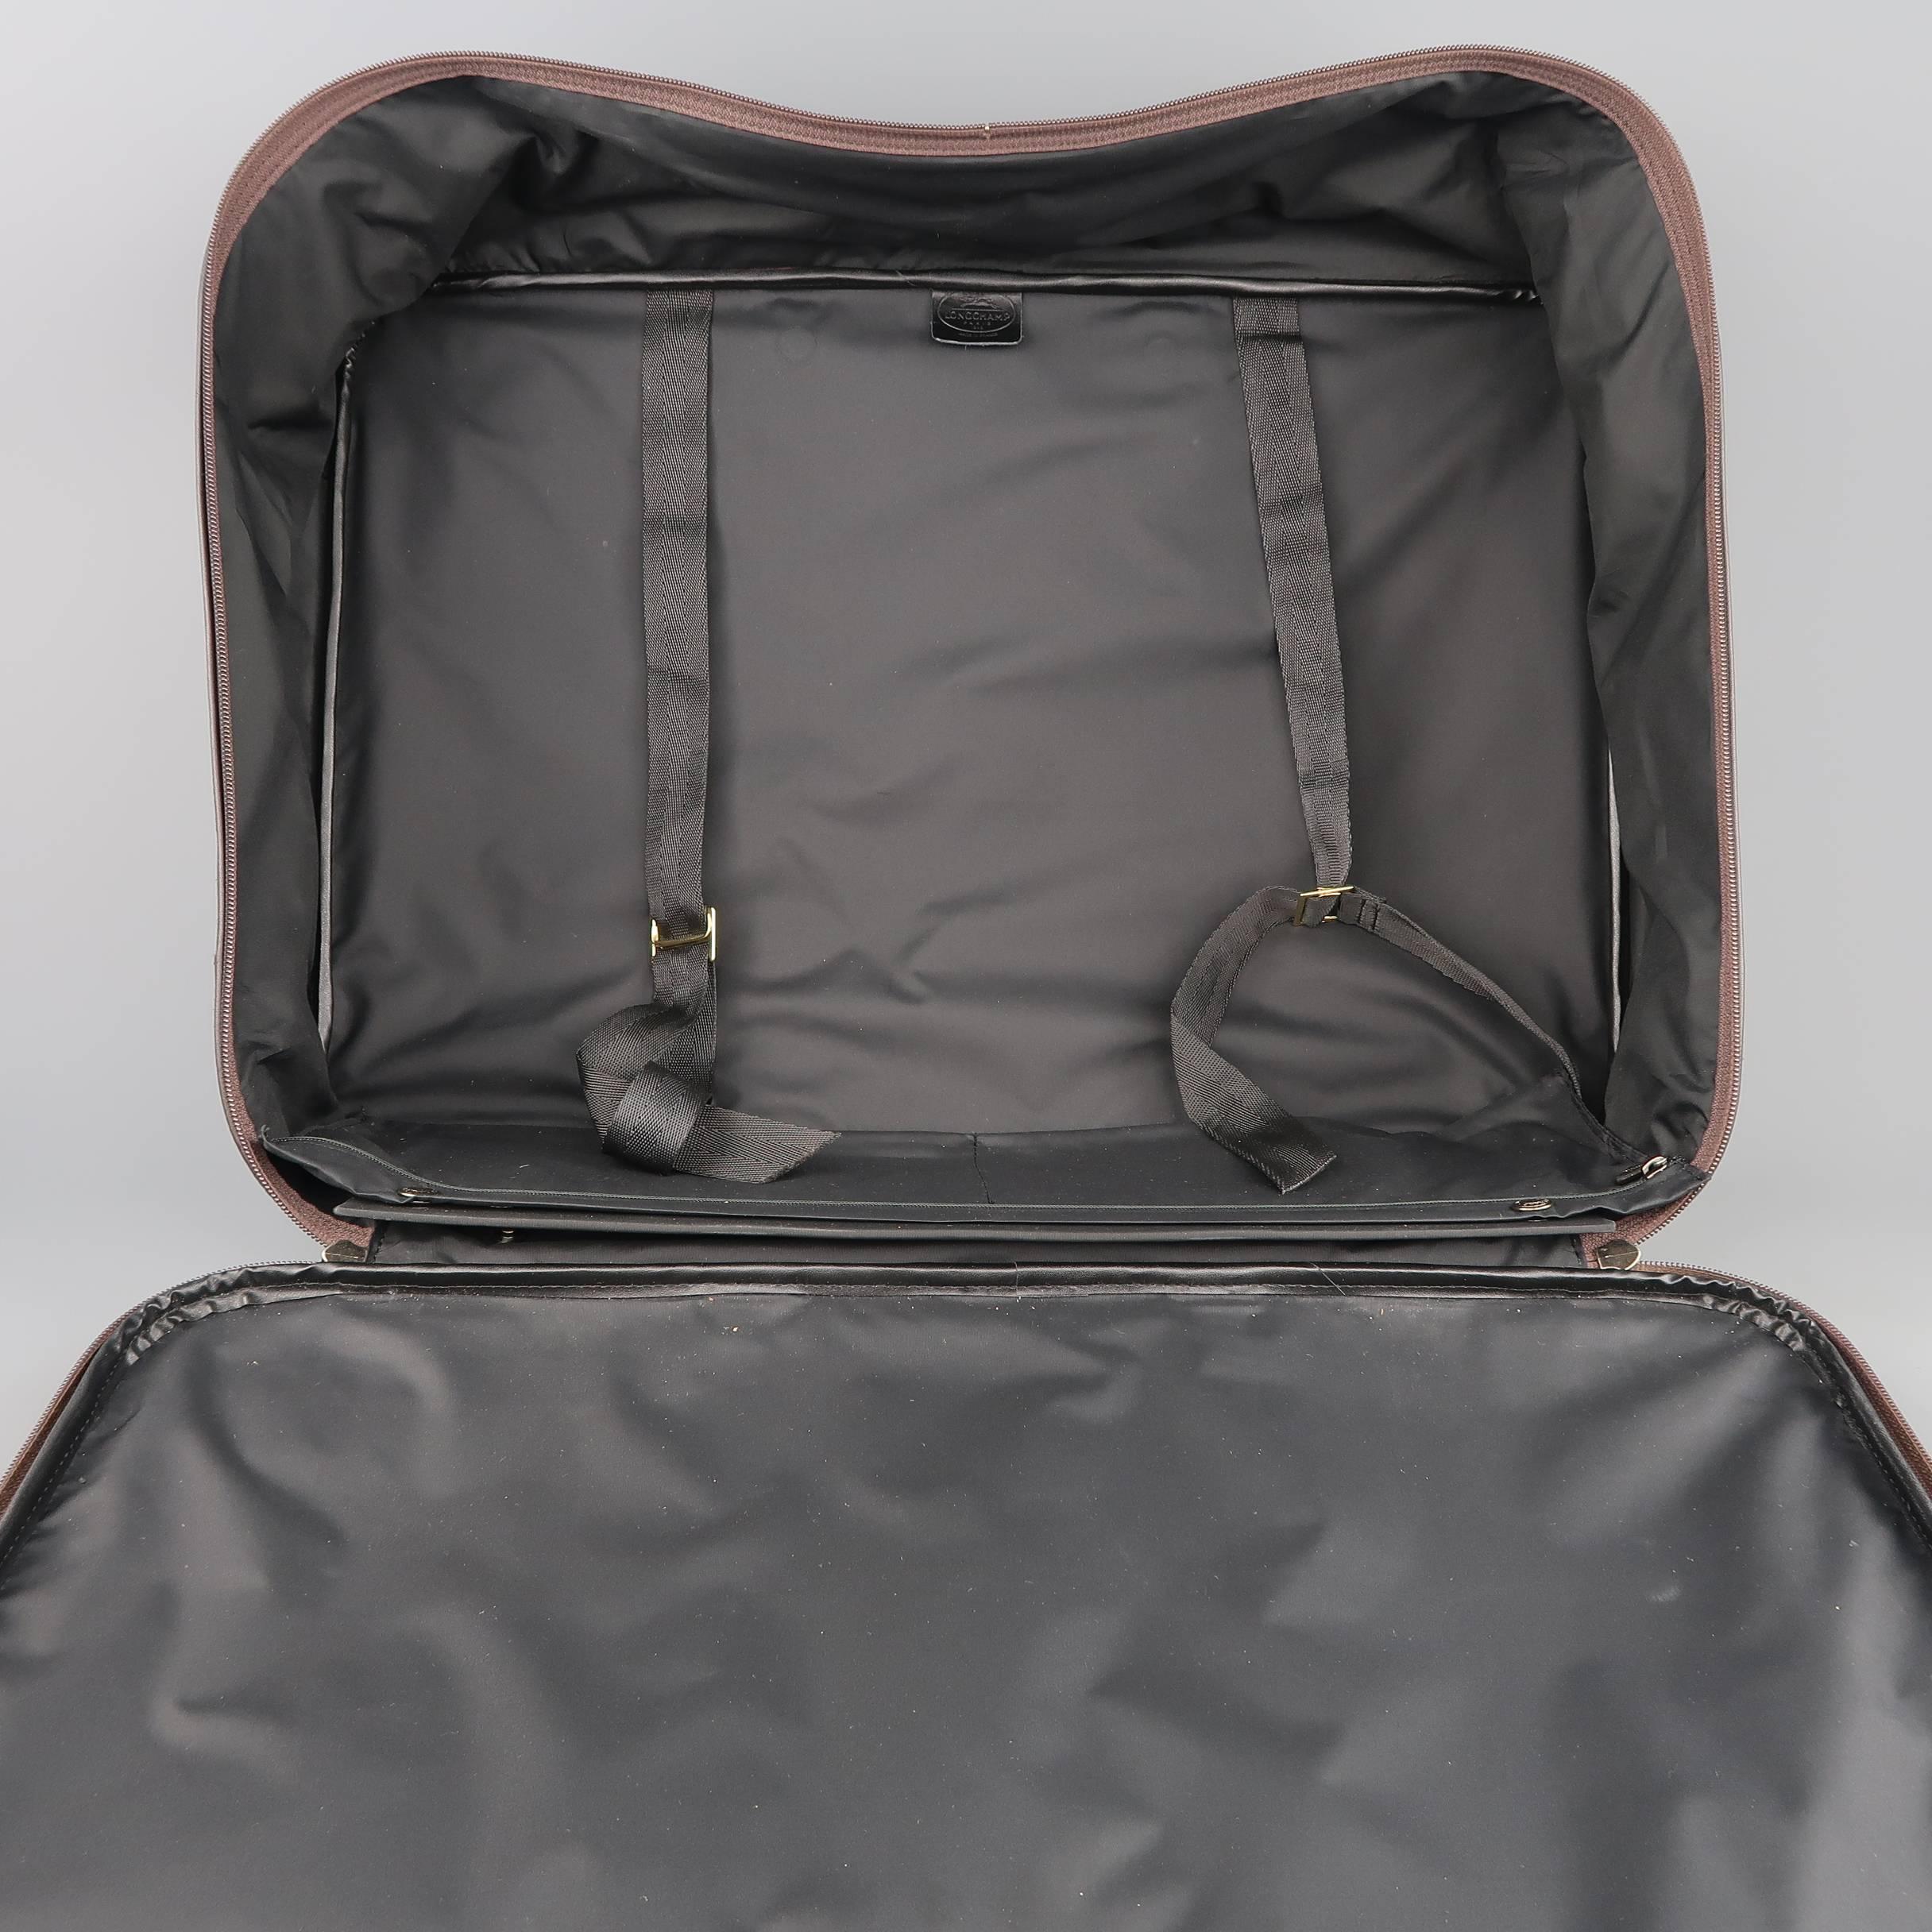 LONGCHAMP Dark Brown Leather Carry On Suitcase Travel Bag 5